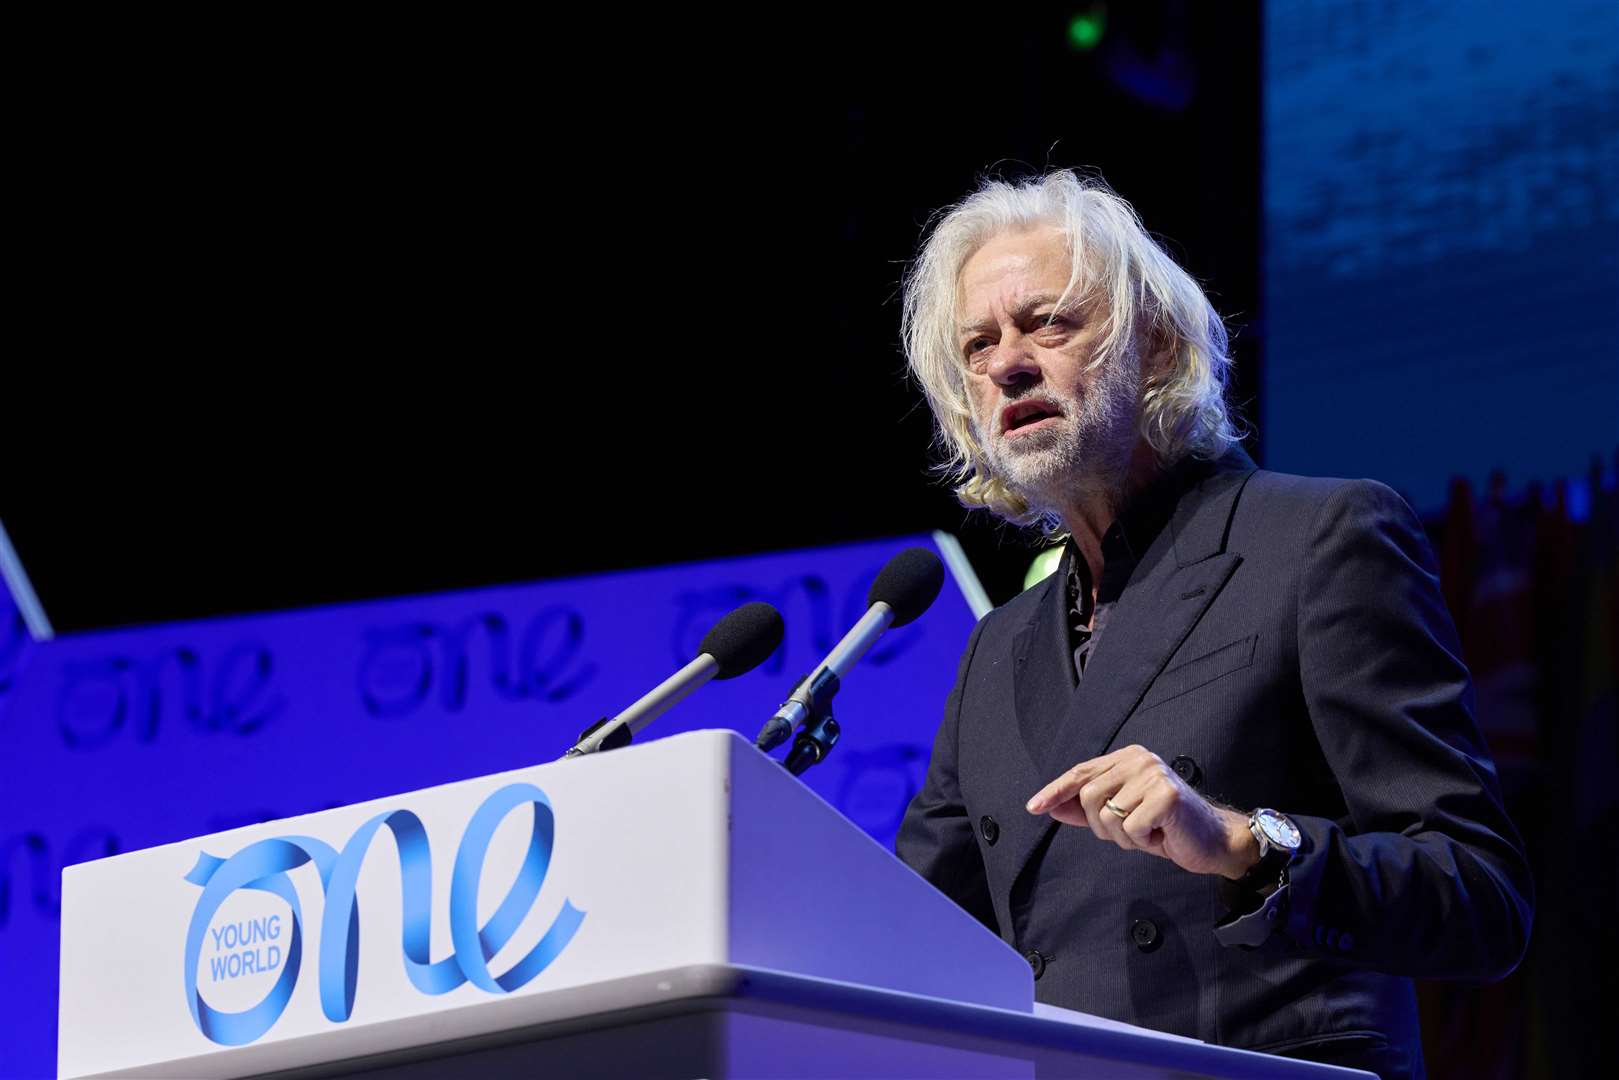 Bob Geldof has been a regular speaker at One Young World summits (One Young World/PA)